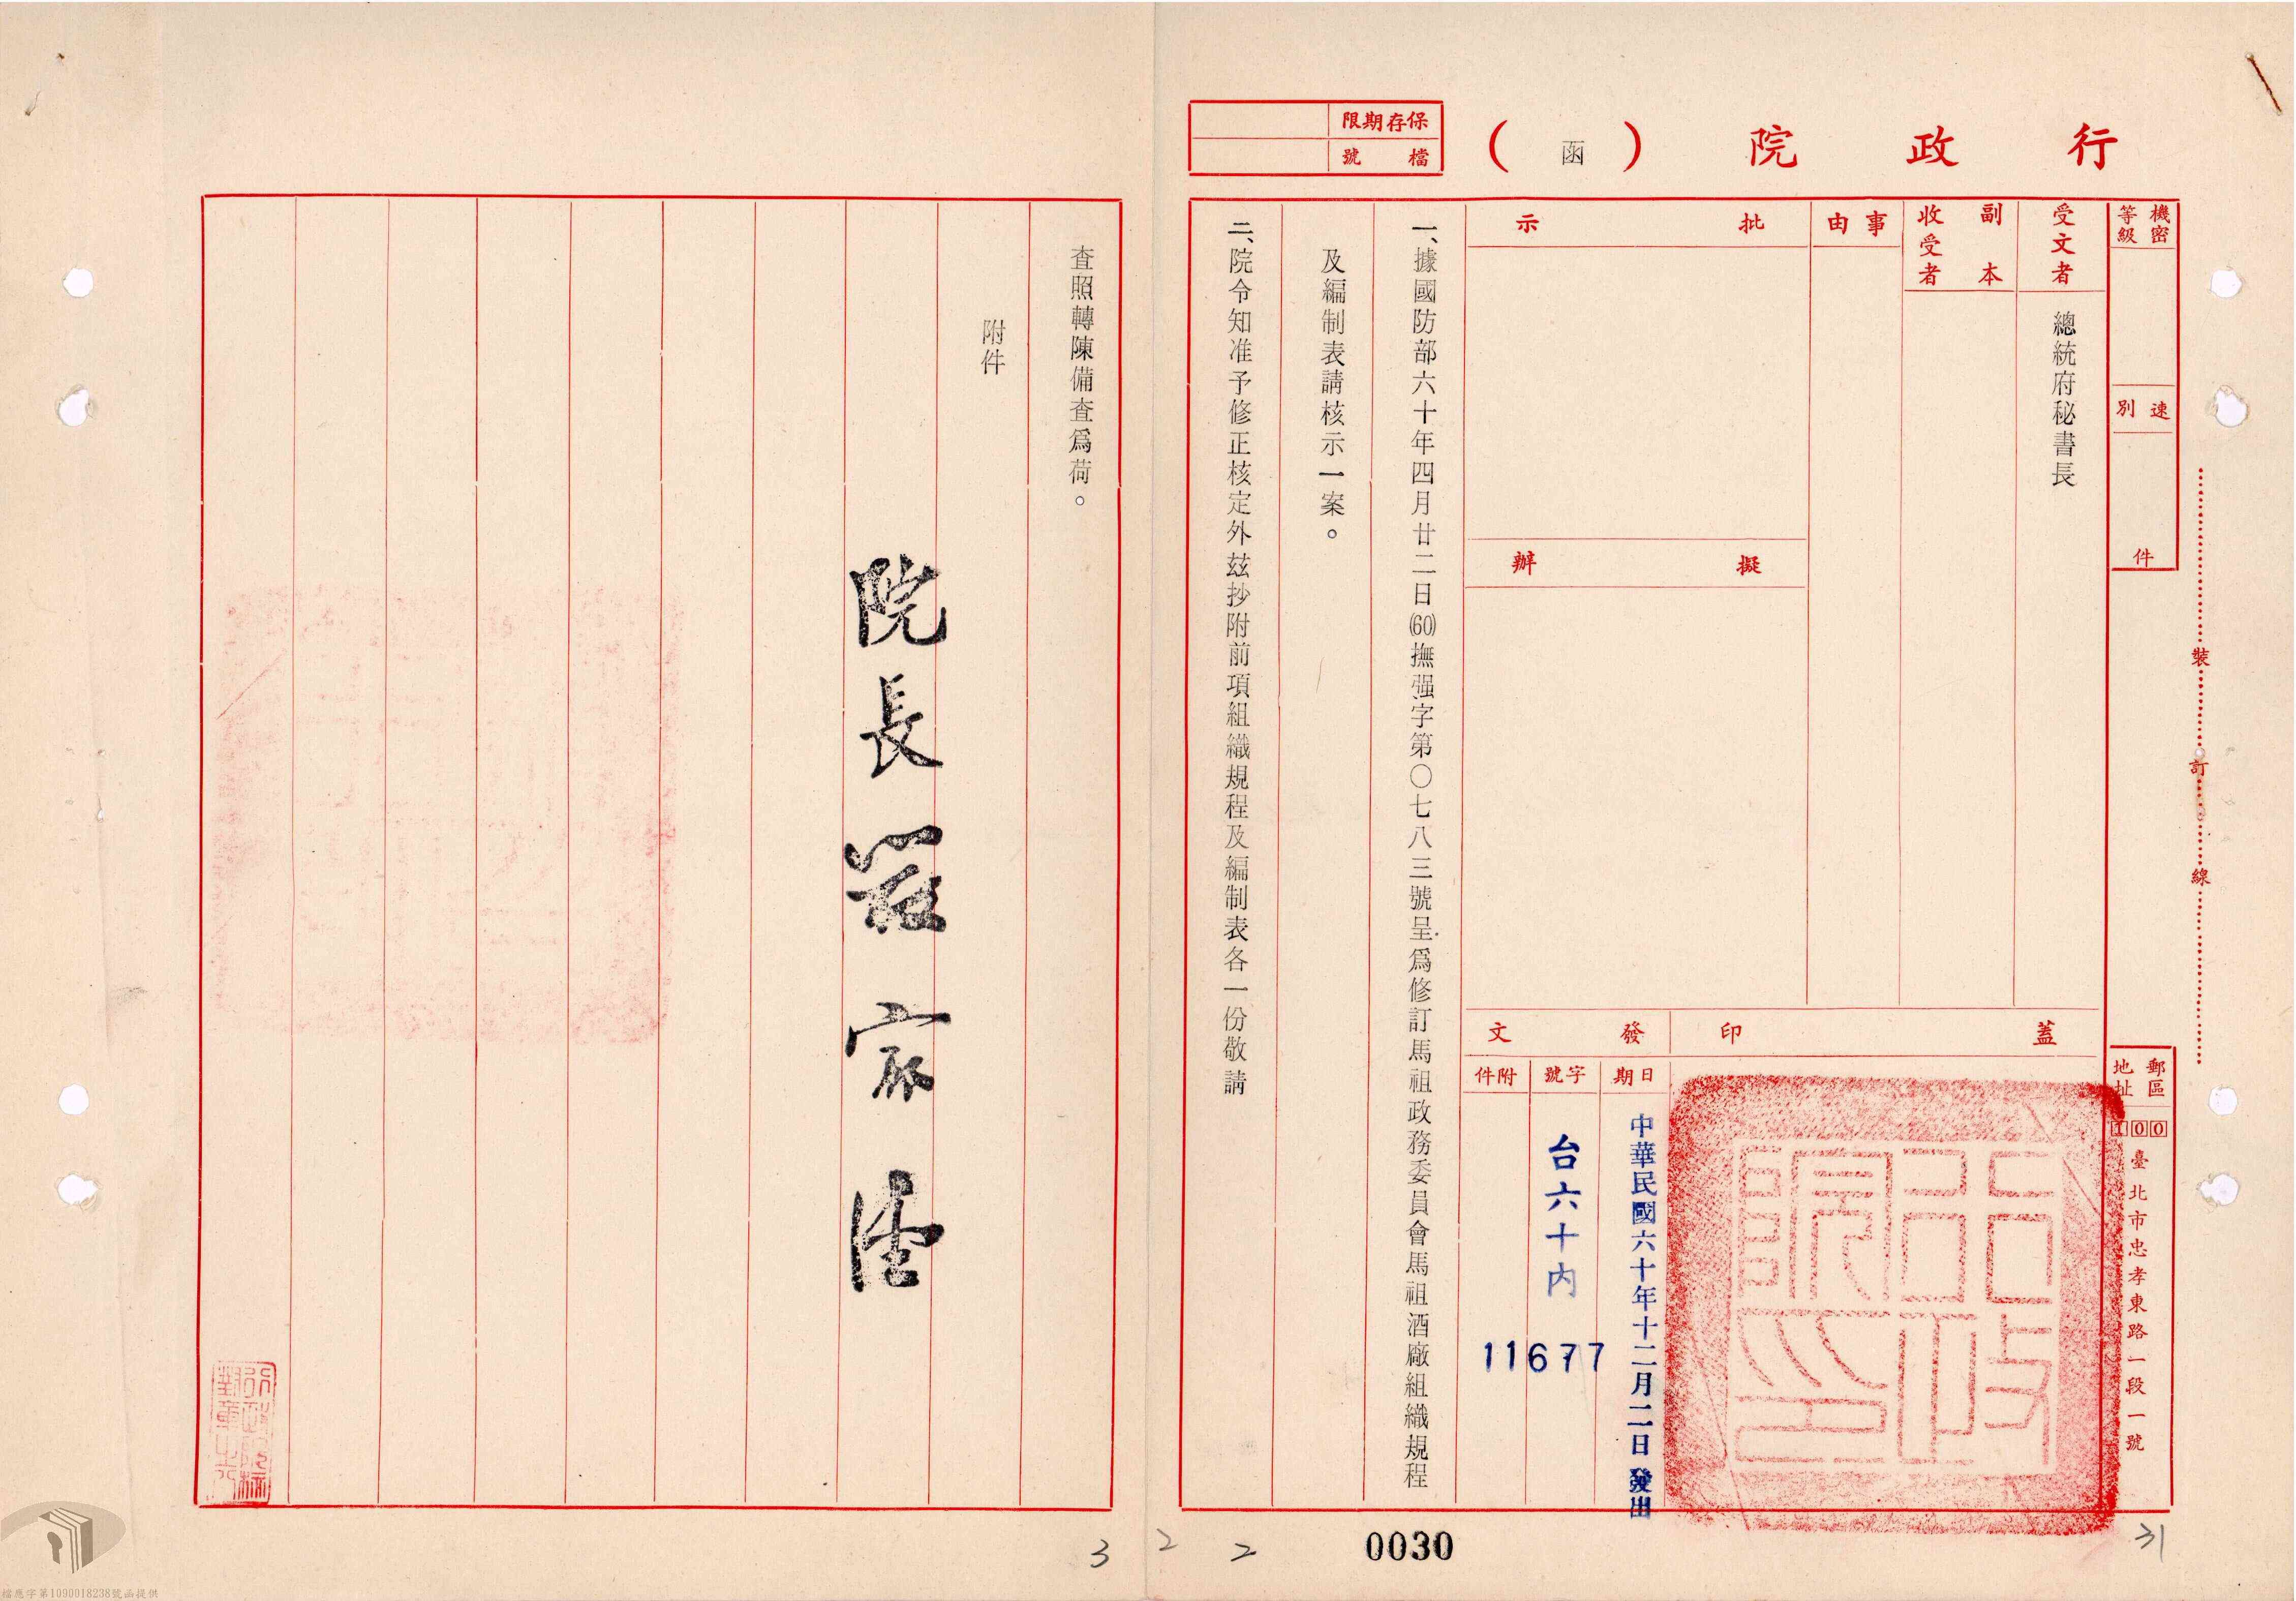 February 1972, the Executive Yuan approves the Organizational Regulations of the Lienchiang County Government during the period of military administration.